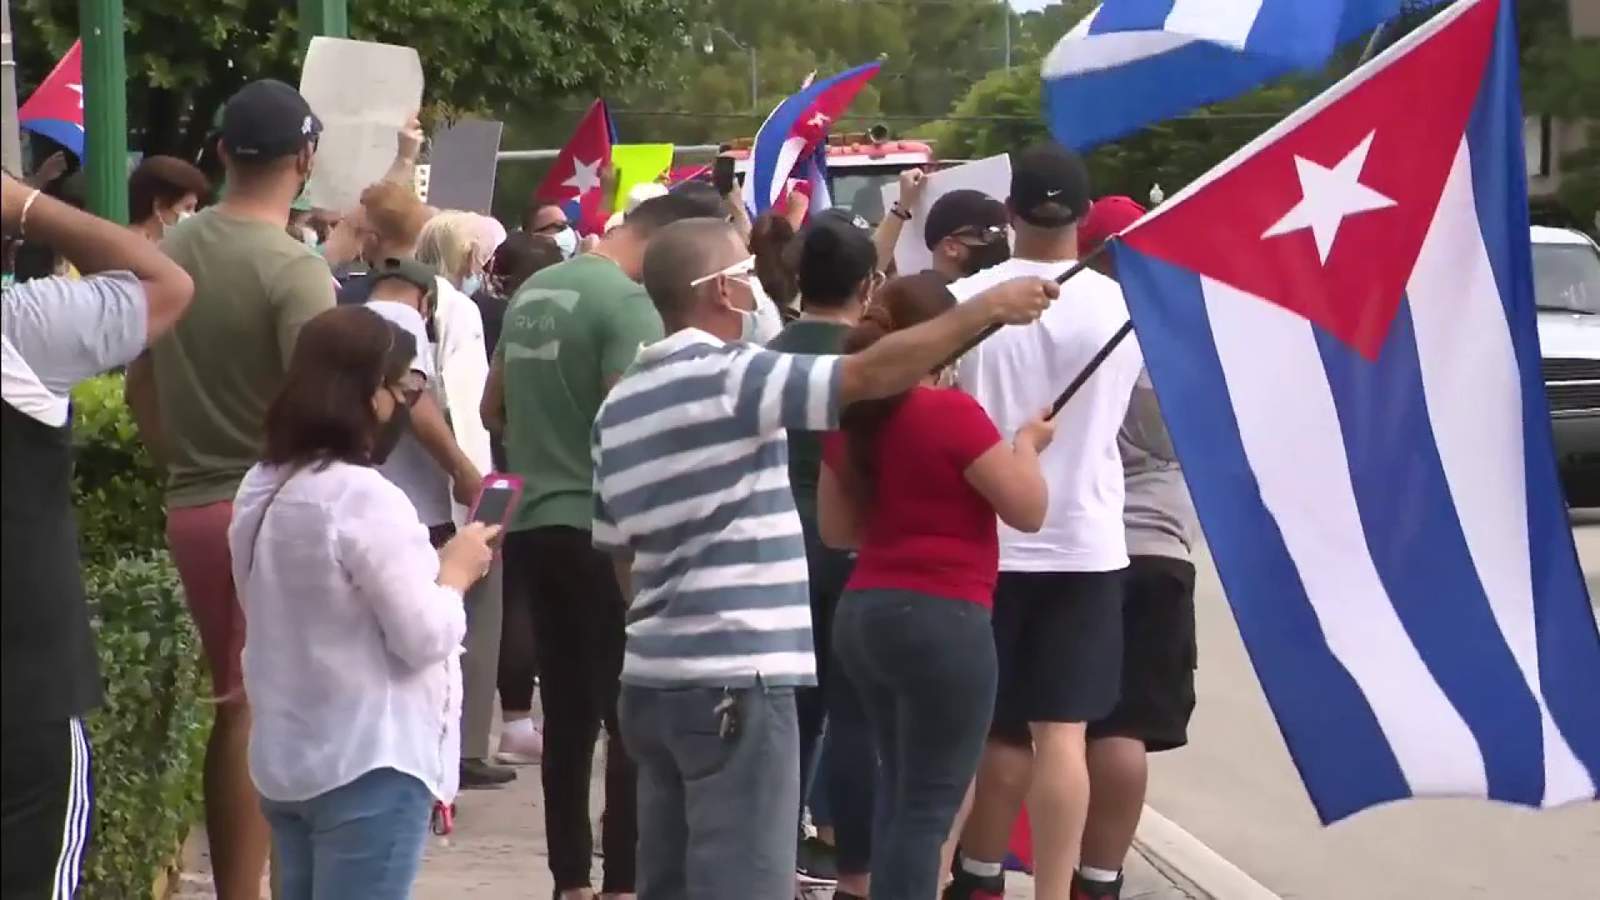 Supporters show up on Calle Ocho in solidarity against Cuban government